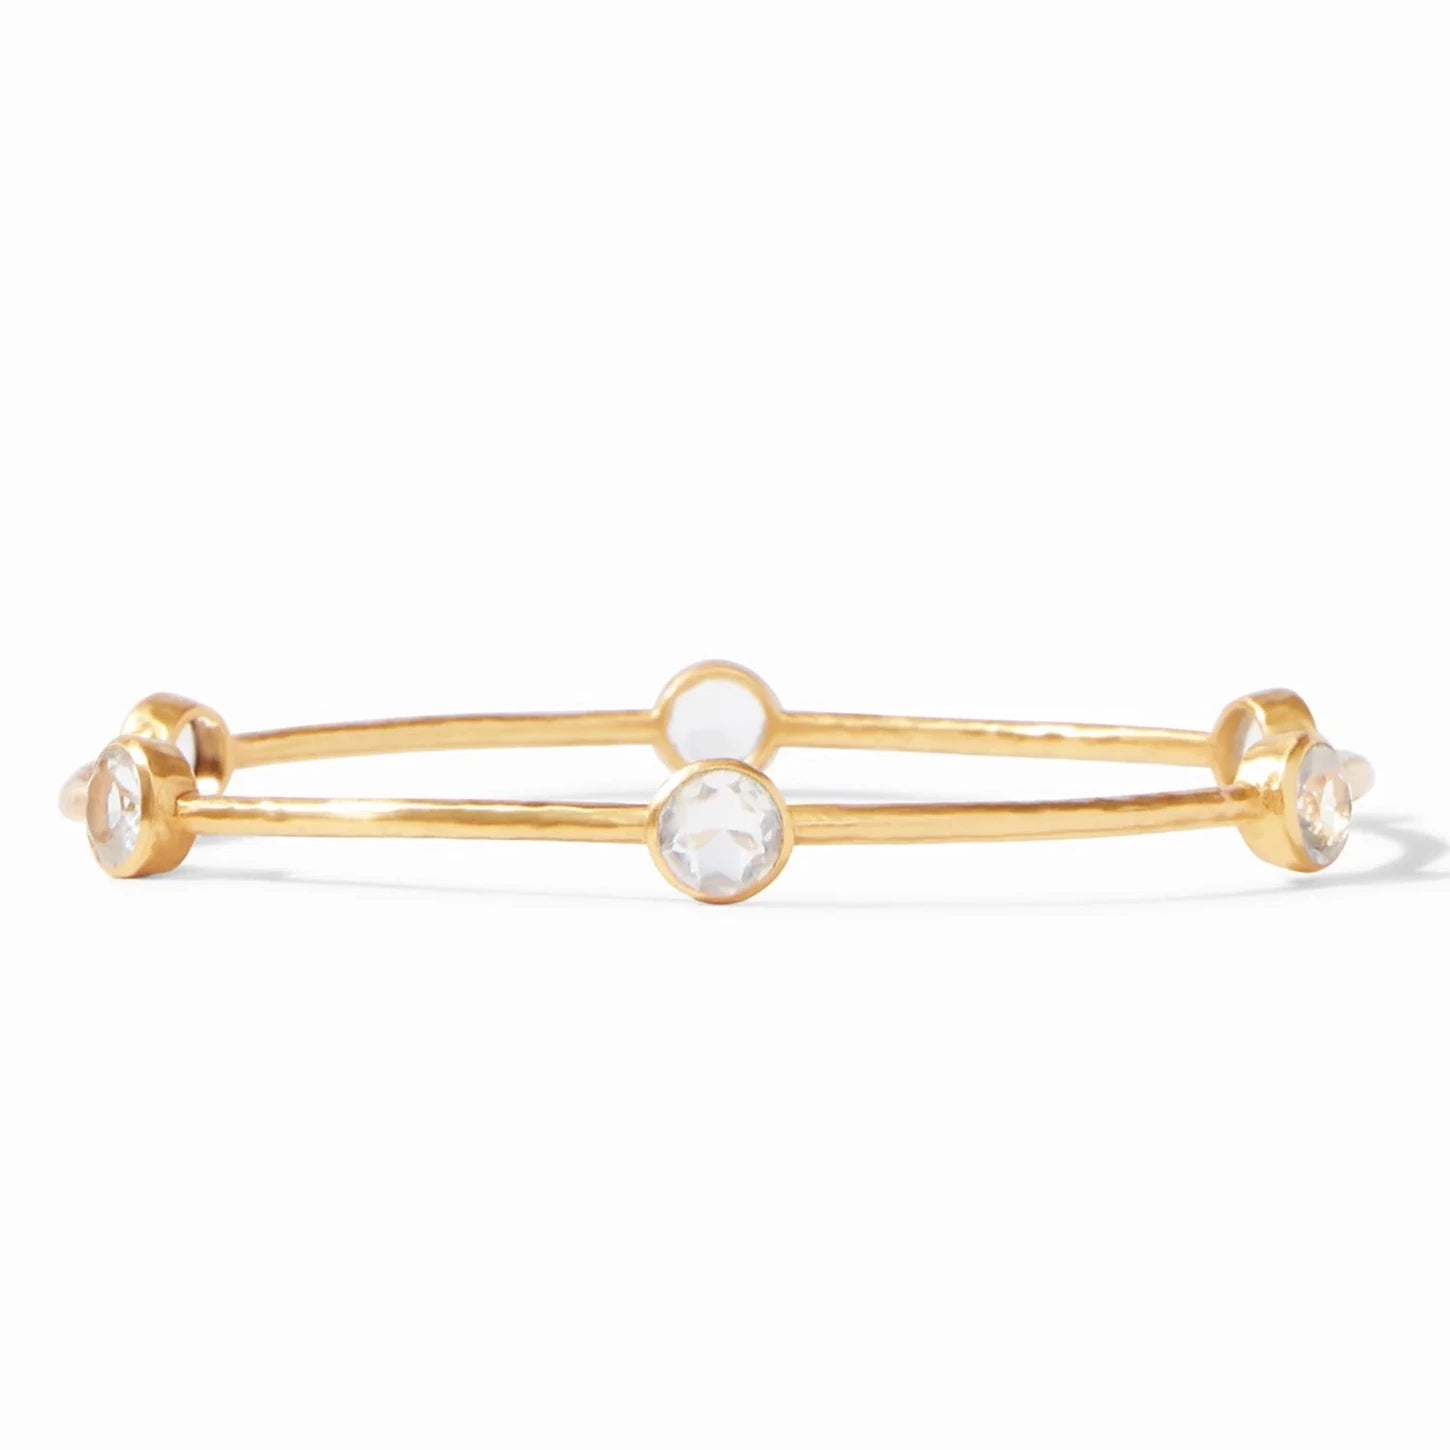 Julie Vos 24K Gold Plated Milano Bangle Bracelet with Clear Crystals, Small